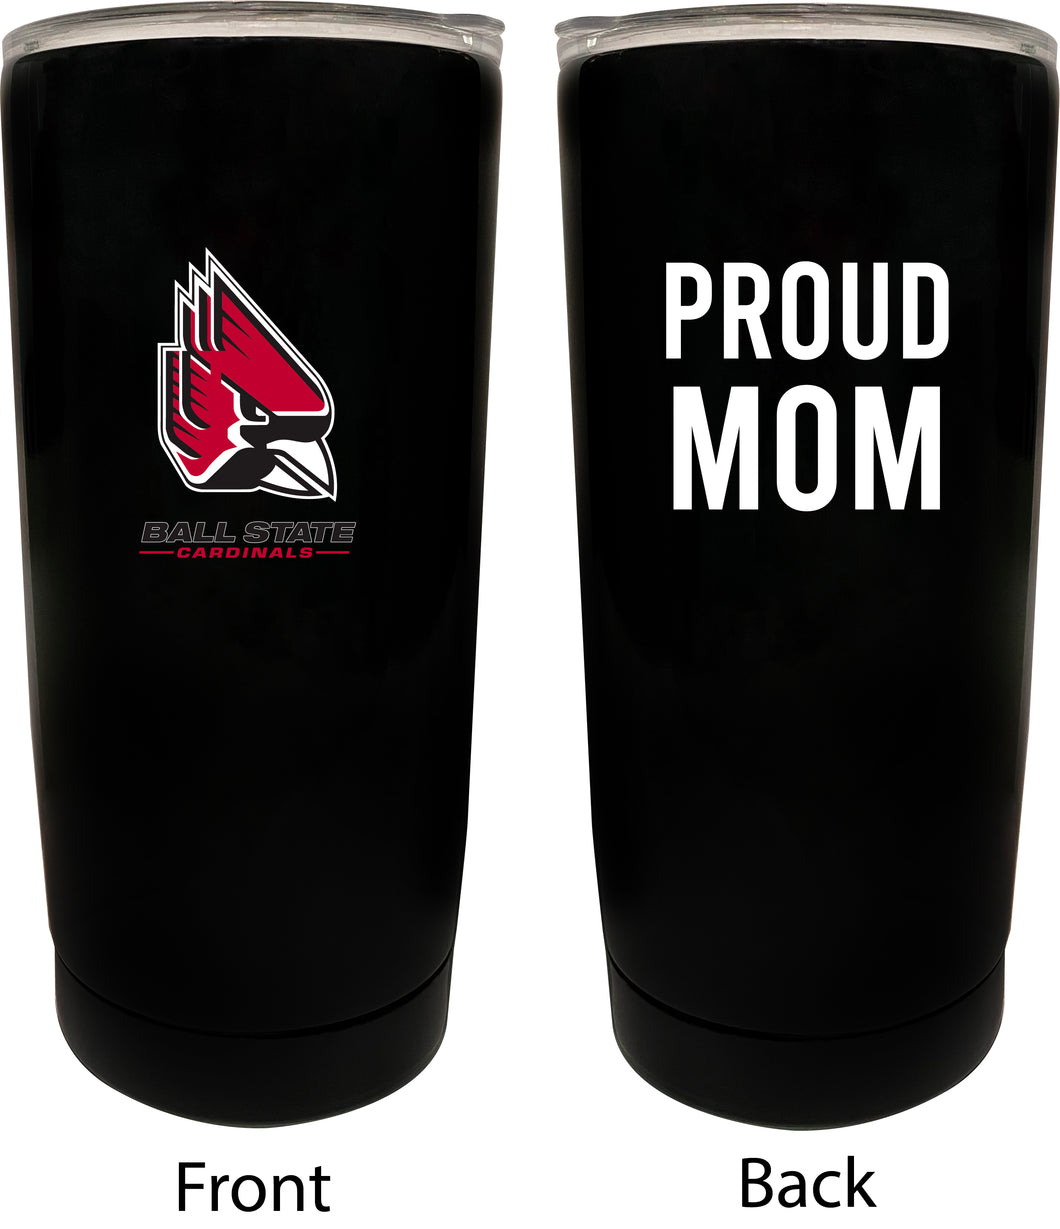 Ball State University Proud Mom 16 oz Insulated Stainless Steel Tumblers